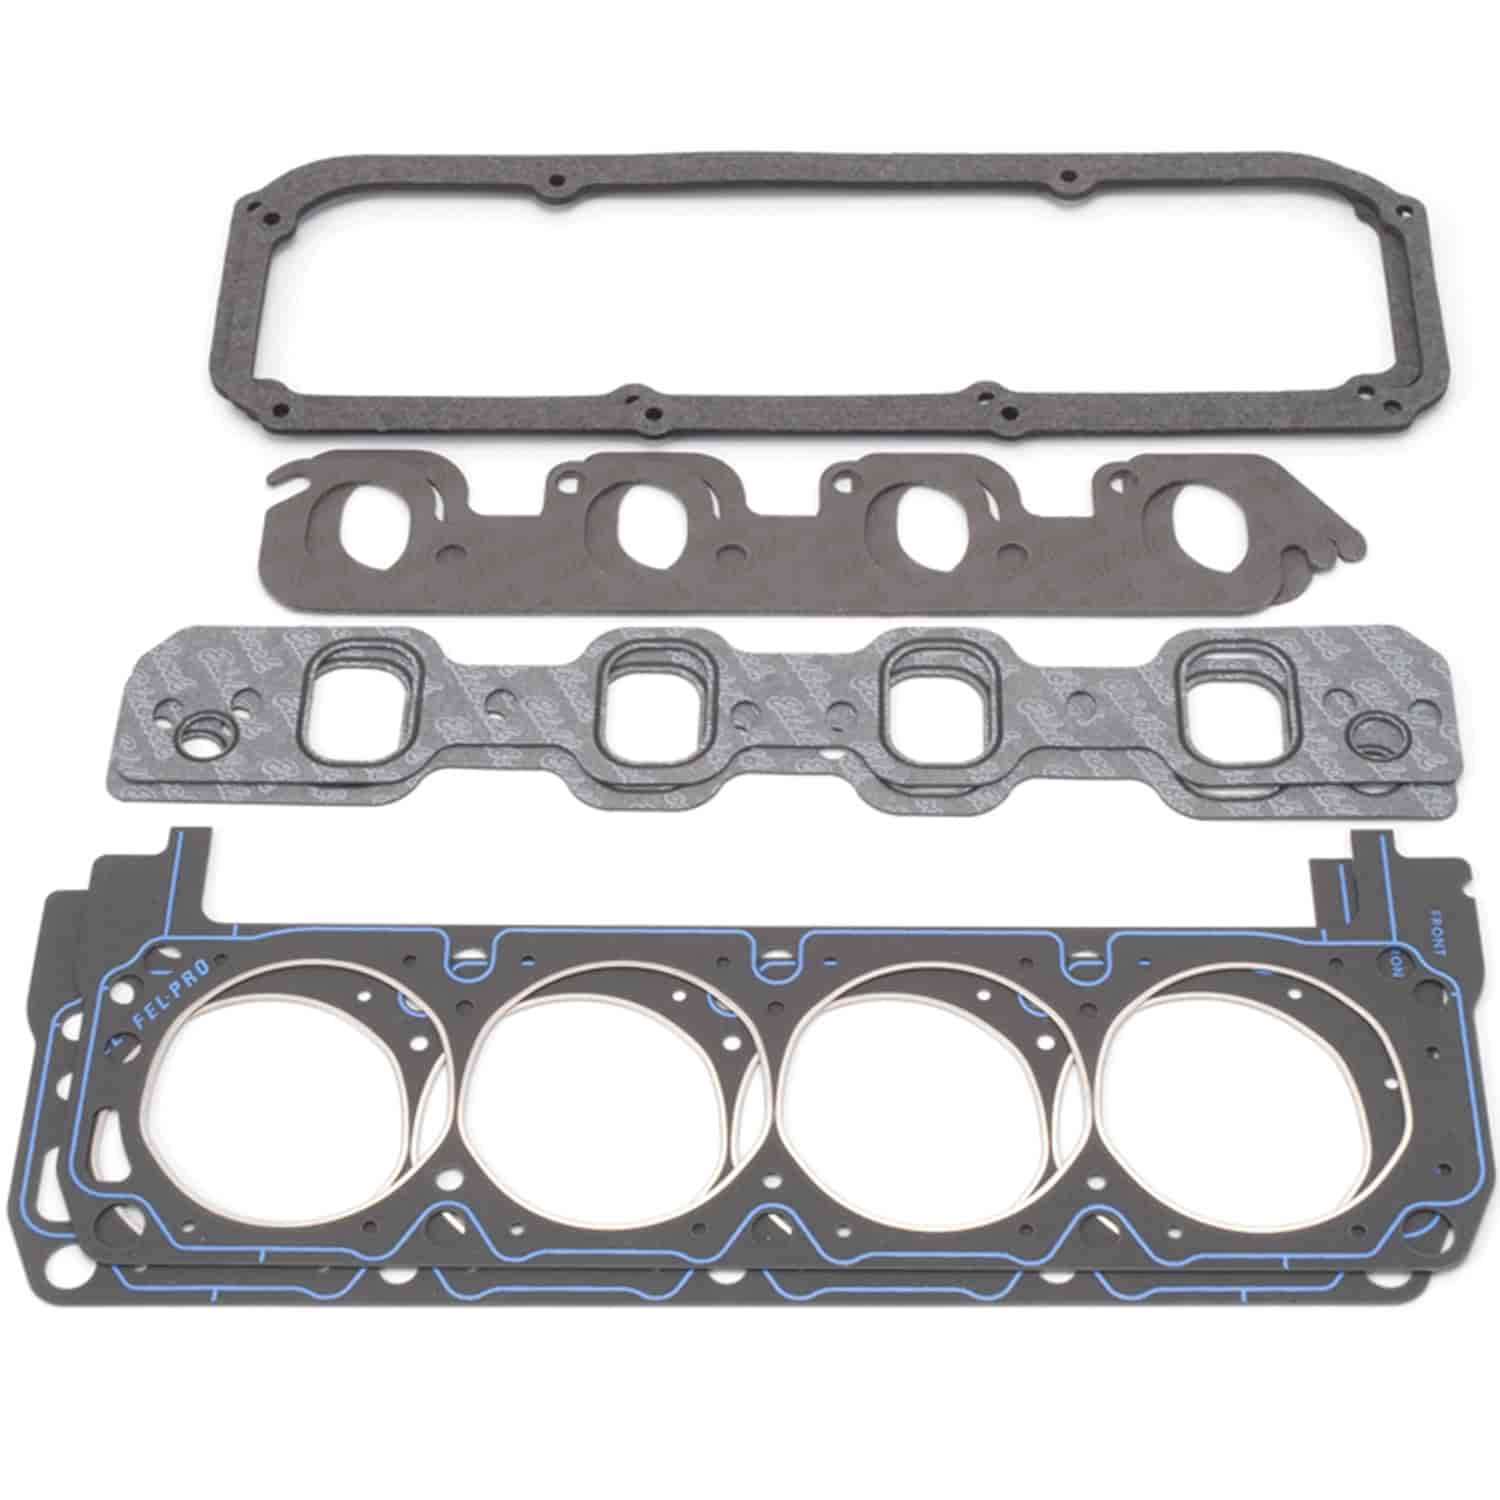 Complete Head Gasket Set for Small Block Ford